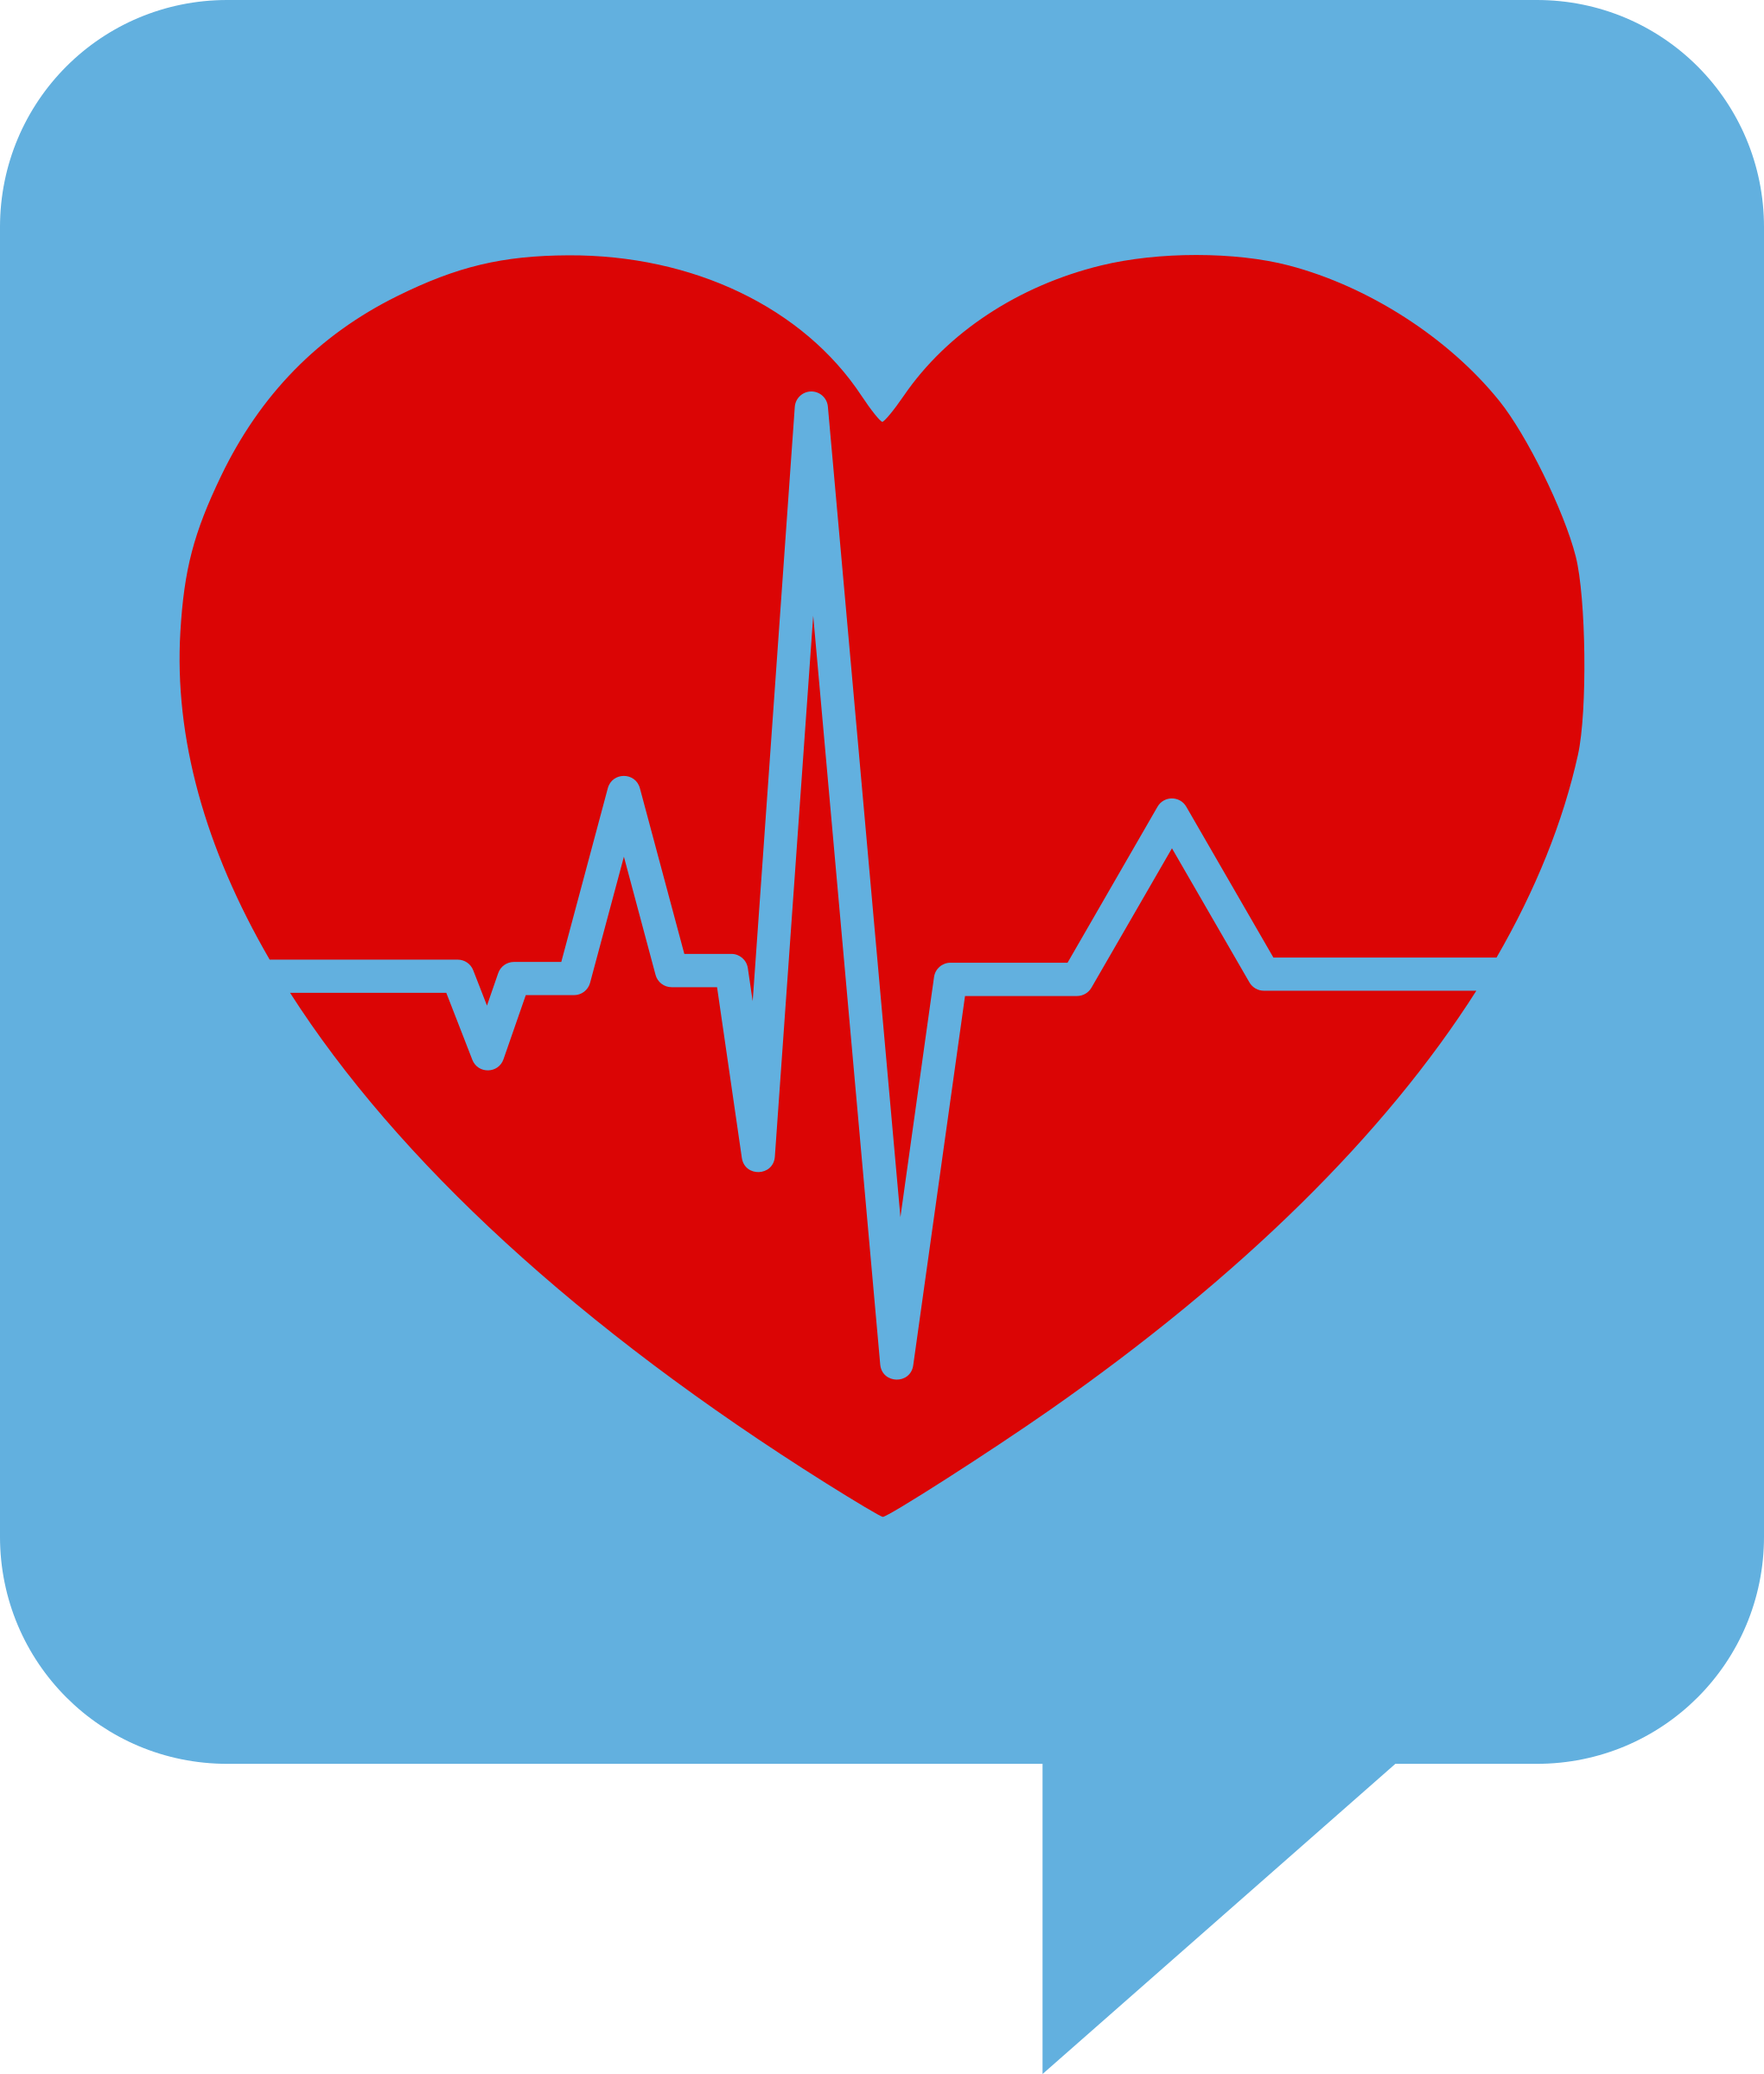 Heartbeat logo for health clipart cliparts and others art